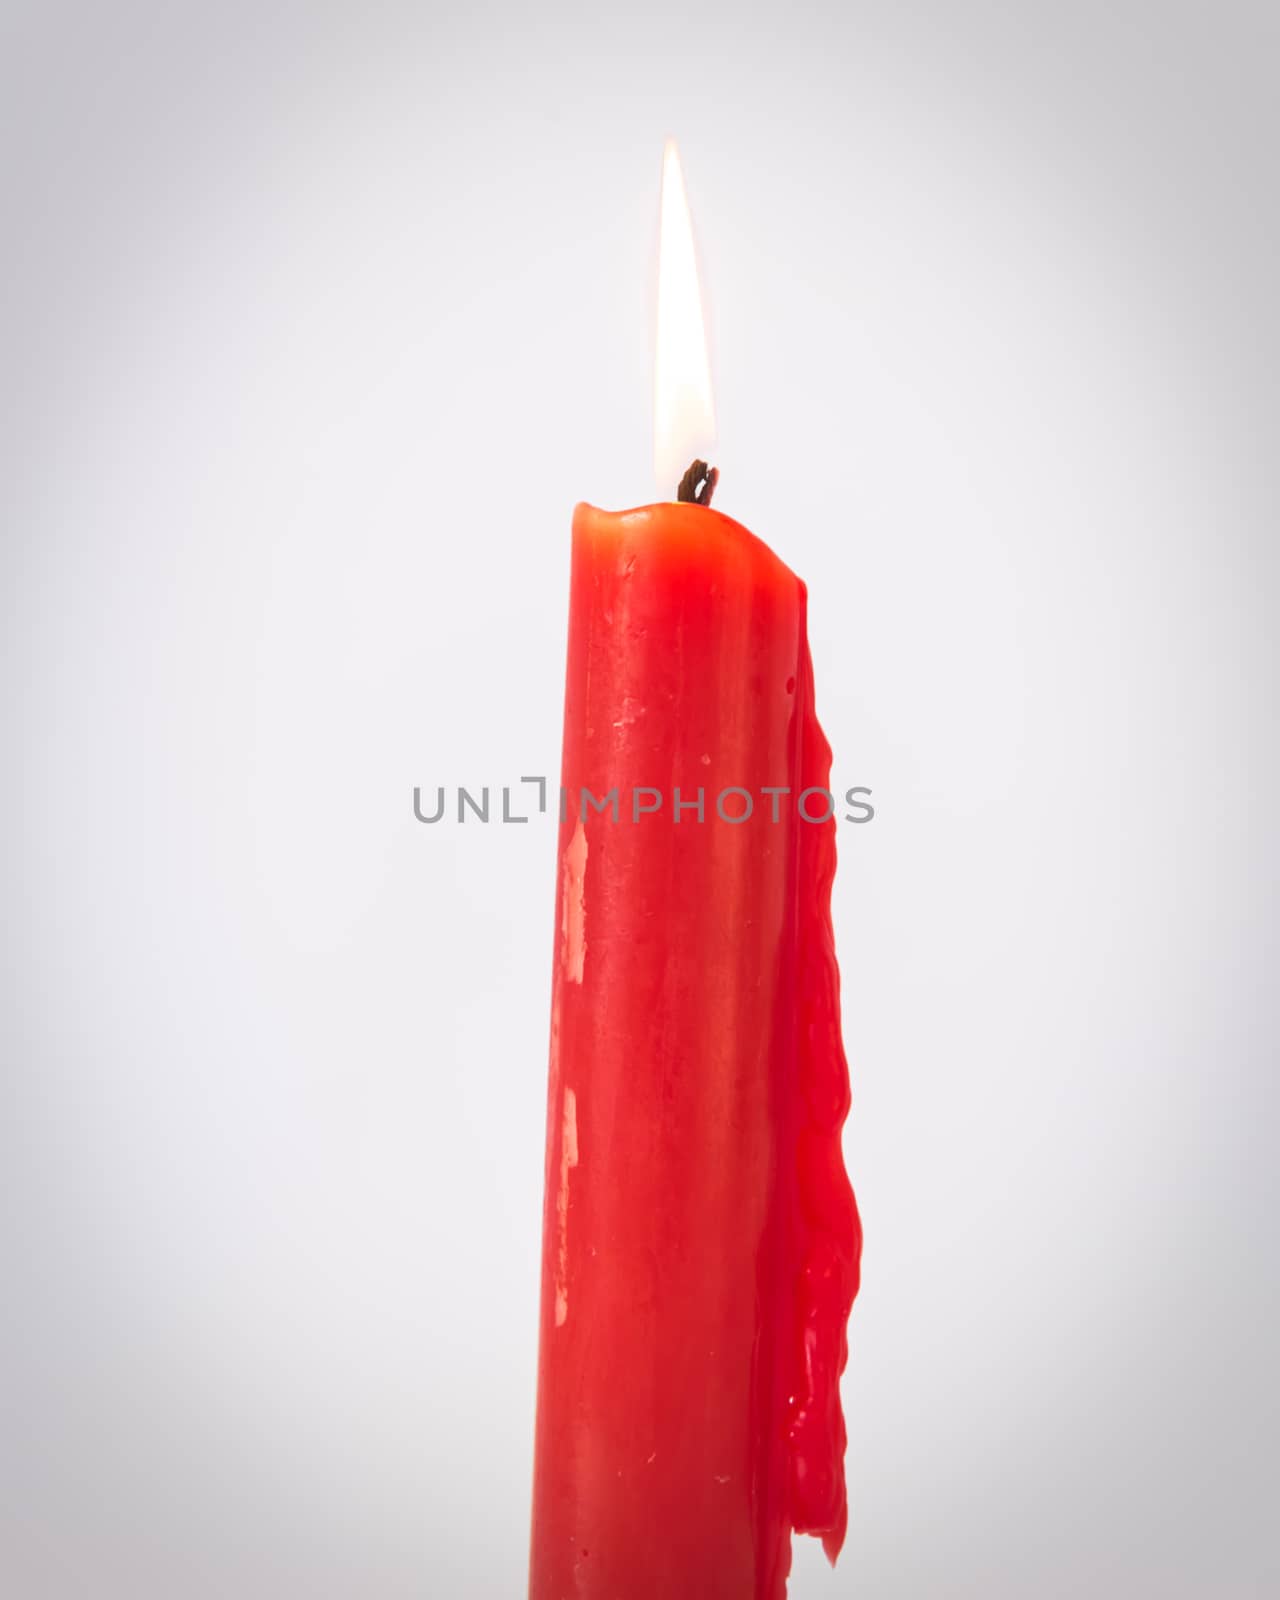 Filtered image studio shot one burning Asian red candle isolated on white by trongnguyen